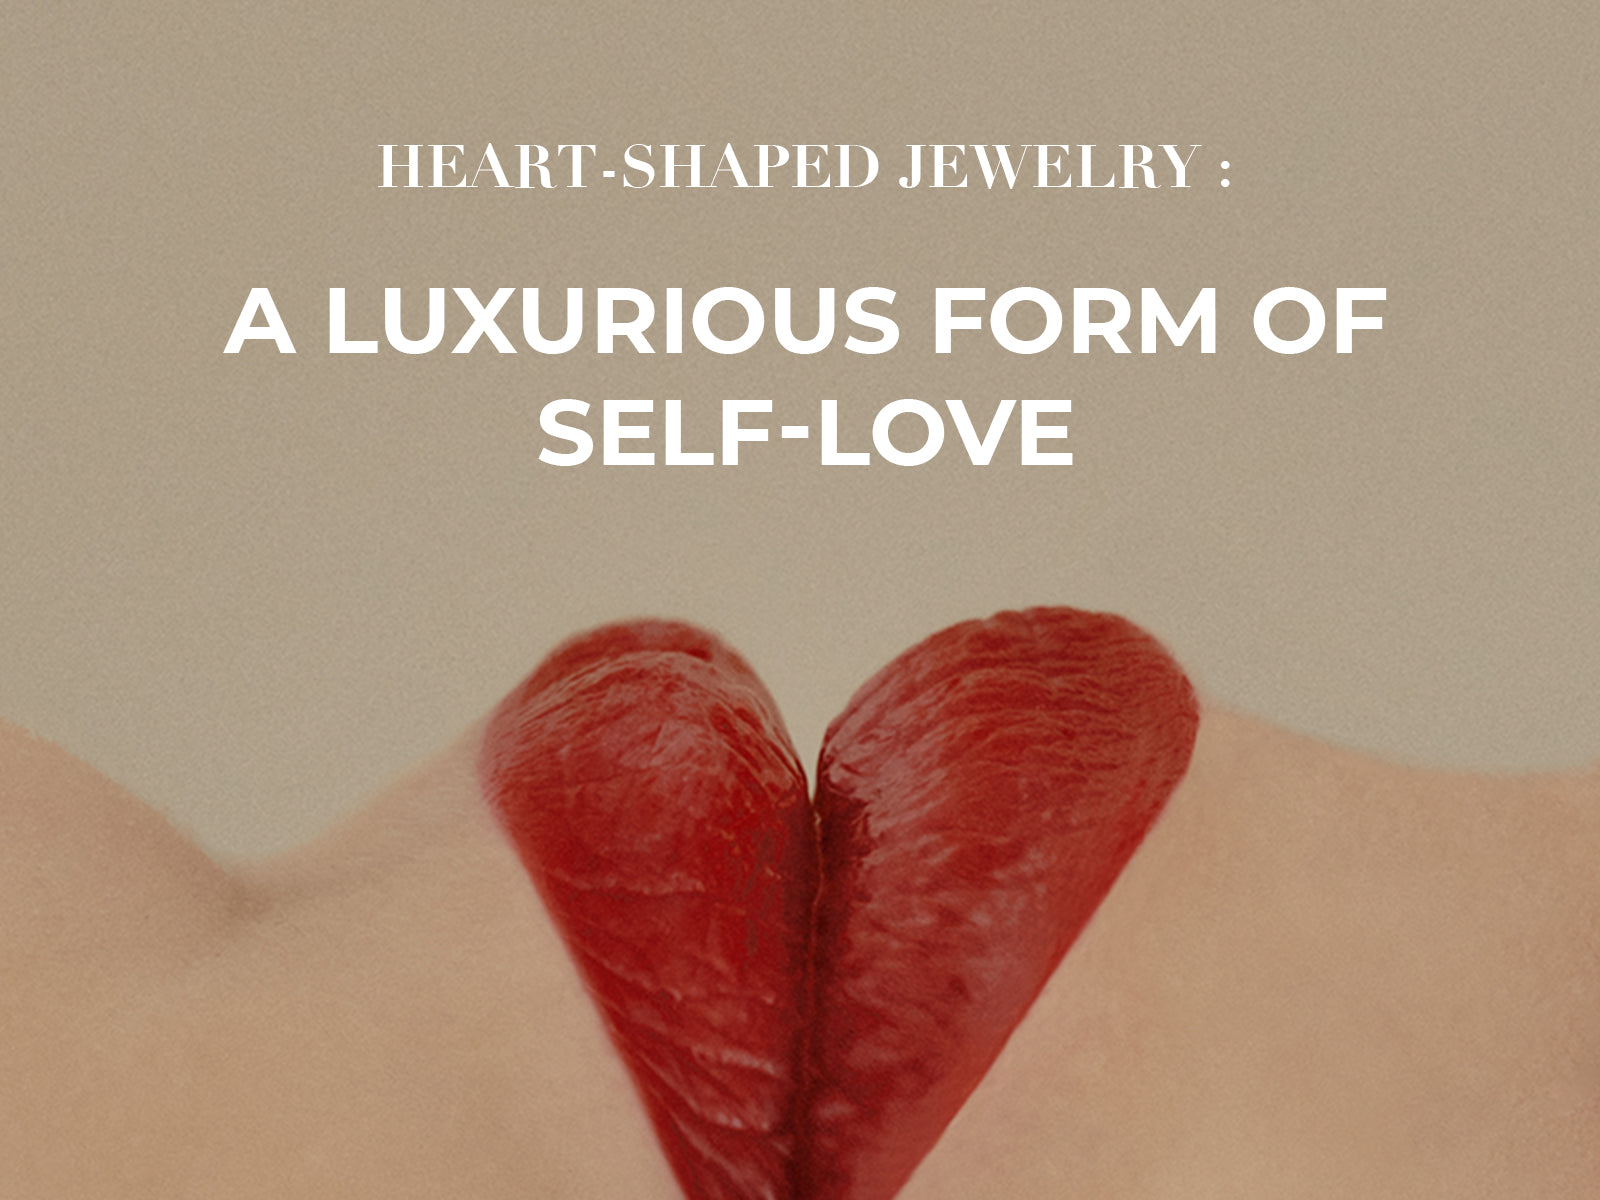 Heart-Shaped Jewelry: A Luxurious Form Of Self-Love